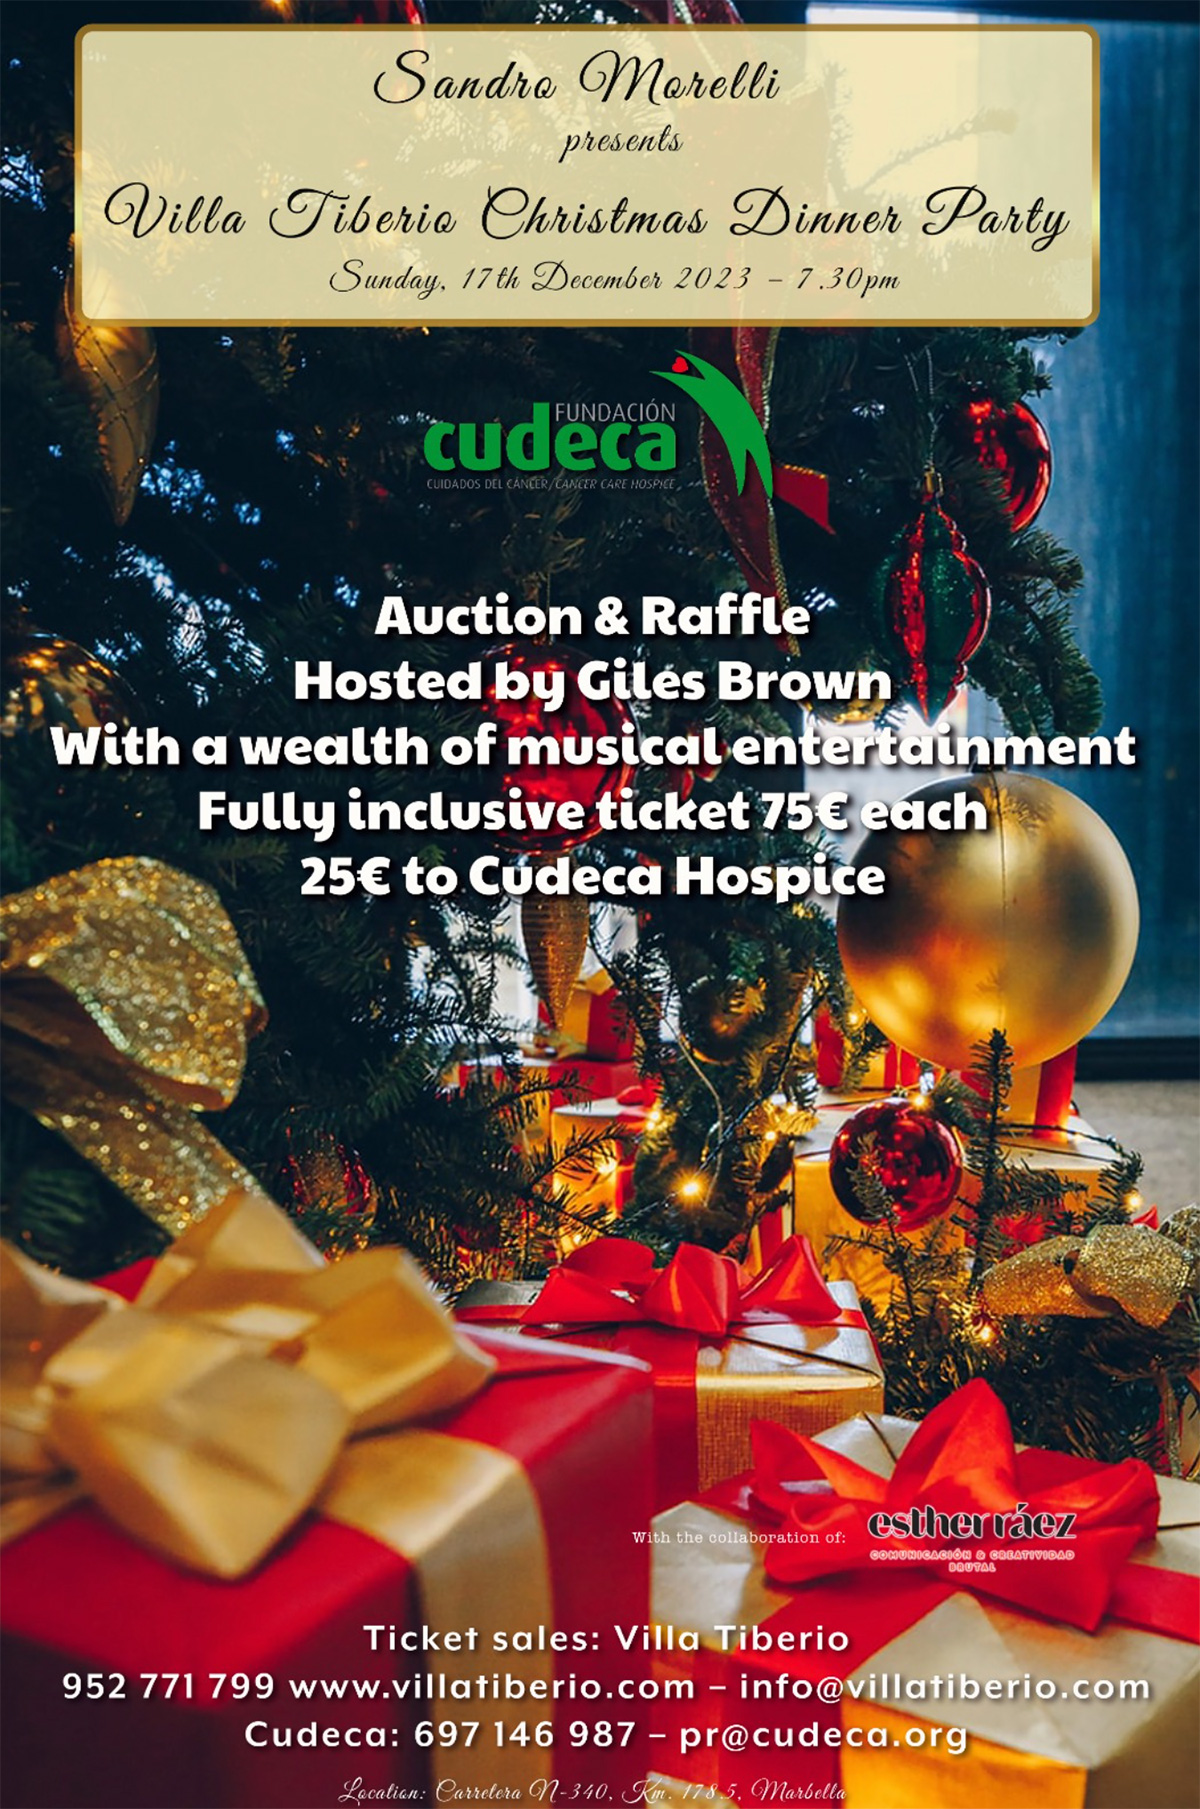 Poster for Cudeca fundraising Auction and Raffle